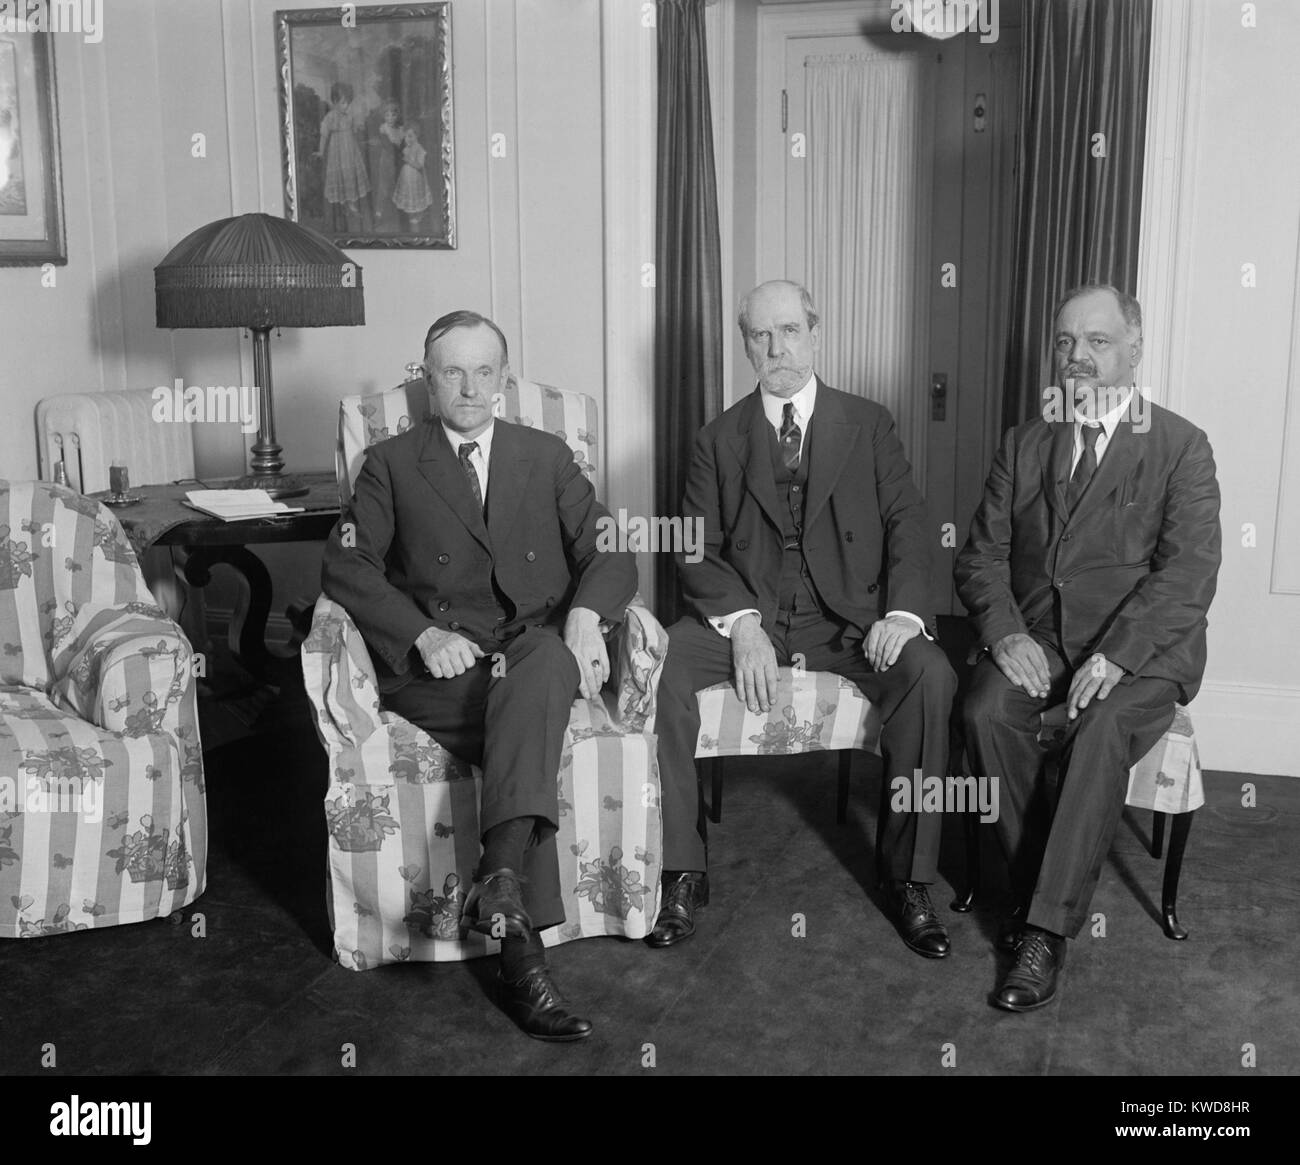 President Calvin Coolidge meeting with Charles Evans Hughes and Charles Curtis, August 3, 1923. Coolidge became President the previous day after Warren Harding died suddenly in San Francisco. Hughes was Secretary of State and Curtis was Senate Minority Whip. They met in the Coolidge family residence at the Willard Hotel, Washington D.C. (BSLOC_2015_16_13) Stock Photo